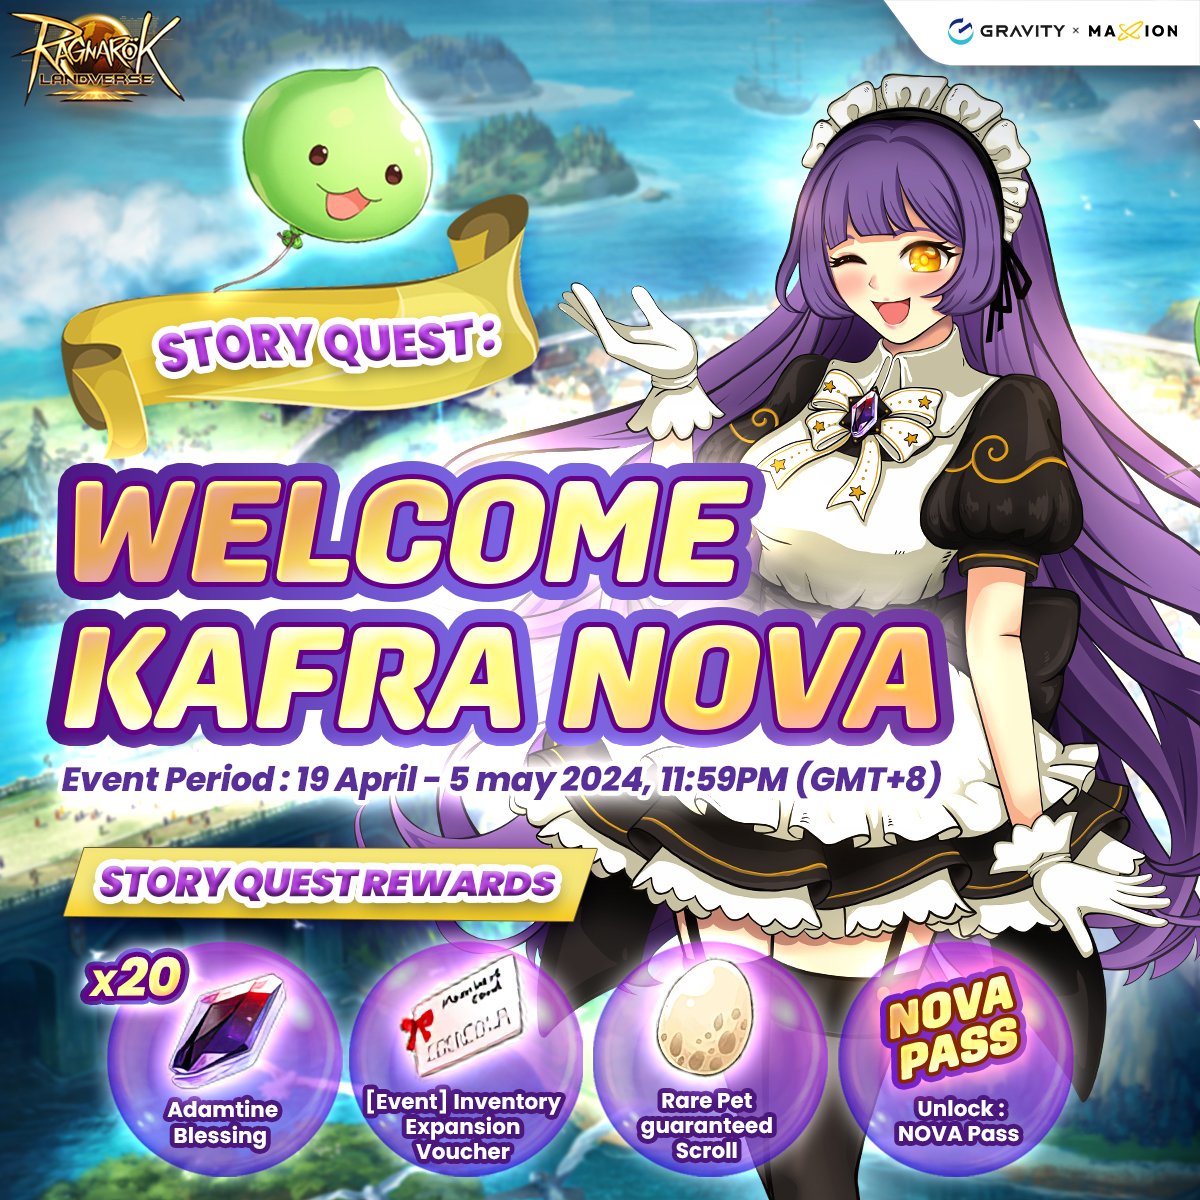 🌟 A new story quest has begun! Start the 'Story Quest: Welcome Kafra NOVA' from April 19 to May 5, 2024, until 11:59 PM (GMT+8). It's never too late to play, download #RagnarokLandverse on PC Now! ☛ landverse.maxion.gg/download2 #Web3Gaming #PCMMORPG #Newserver